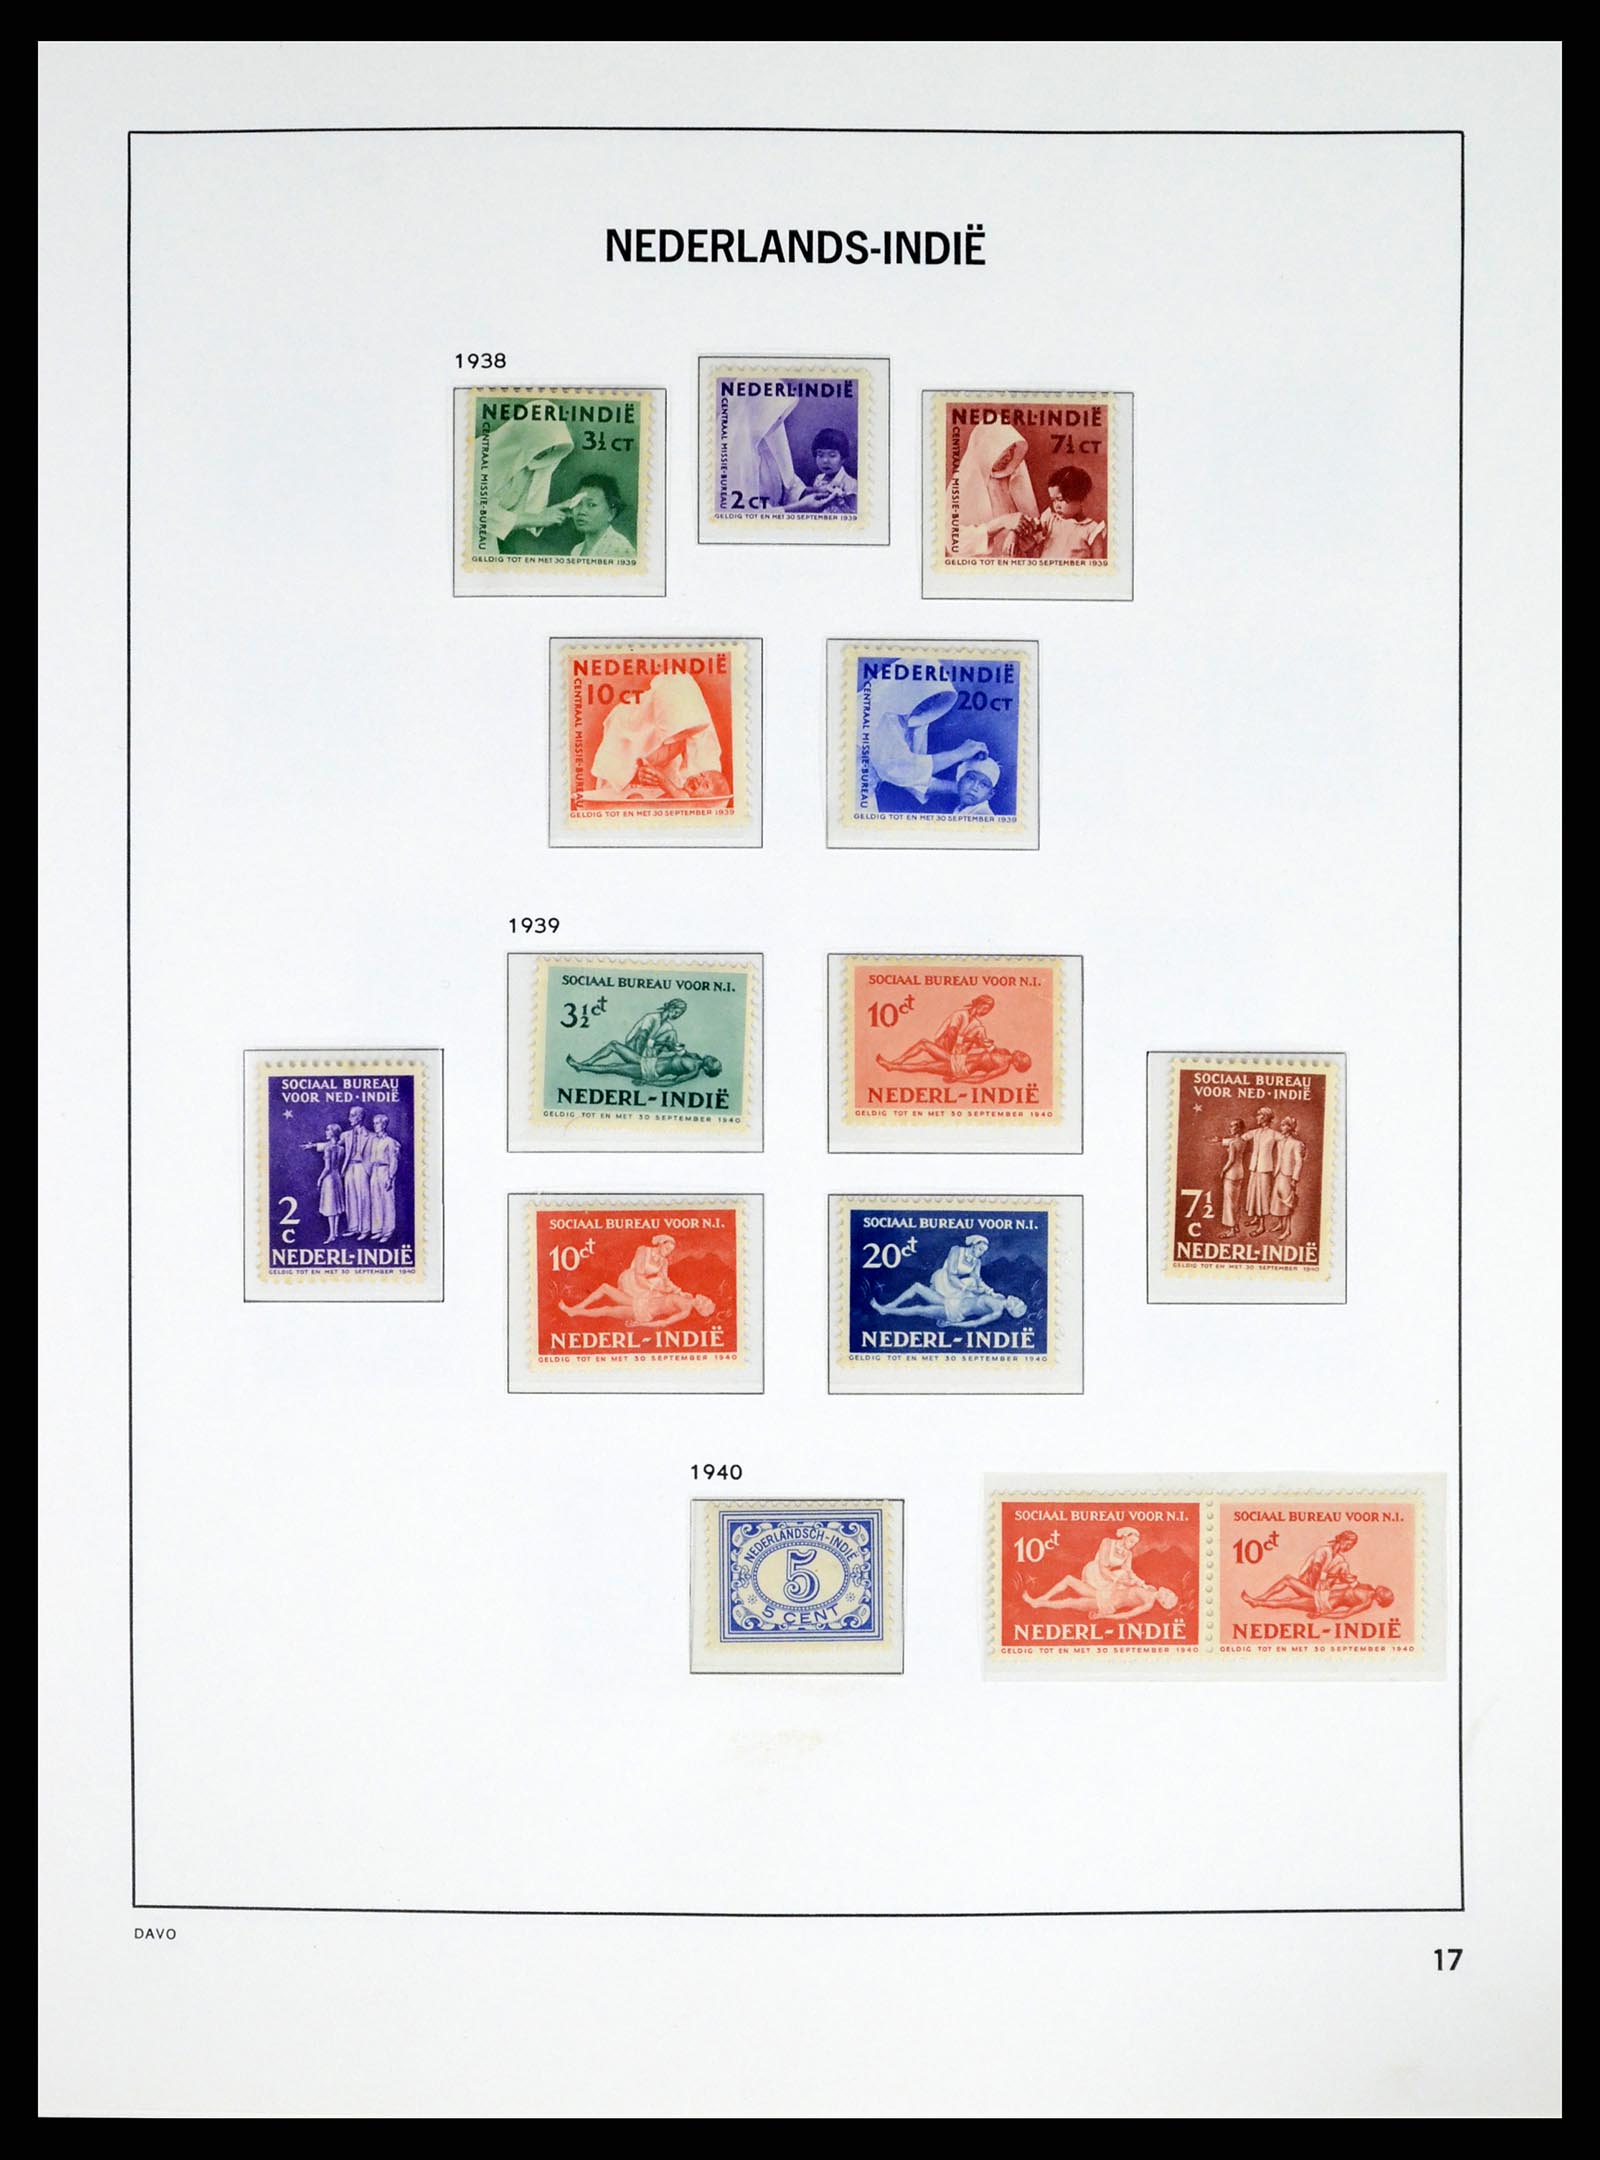 37332 017 - Stamp collection 37332 Dutch East Indies 1864-1949.